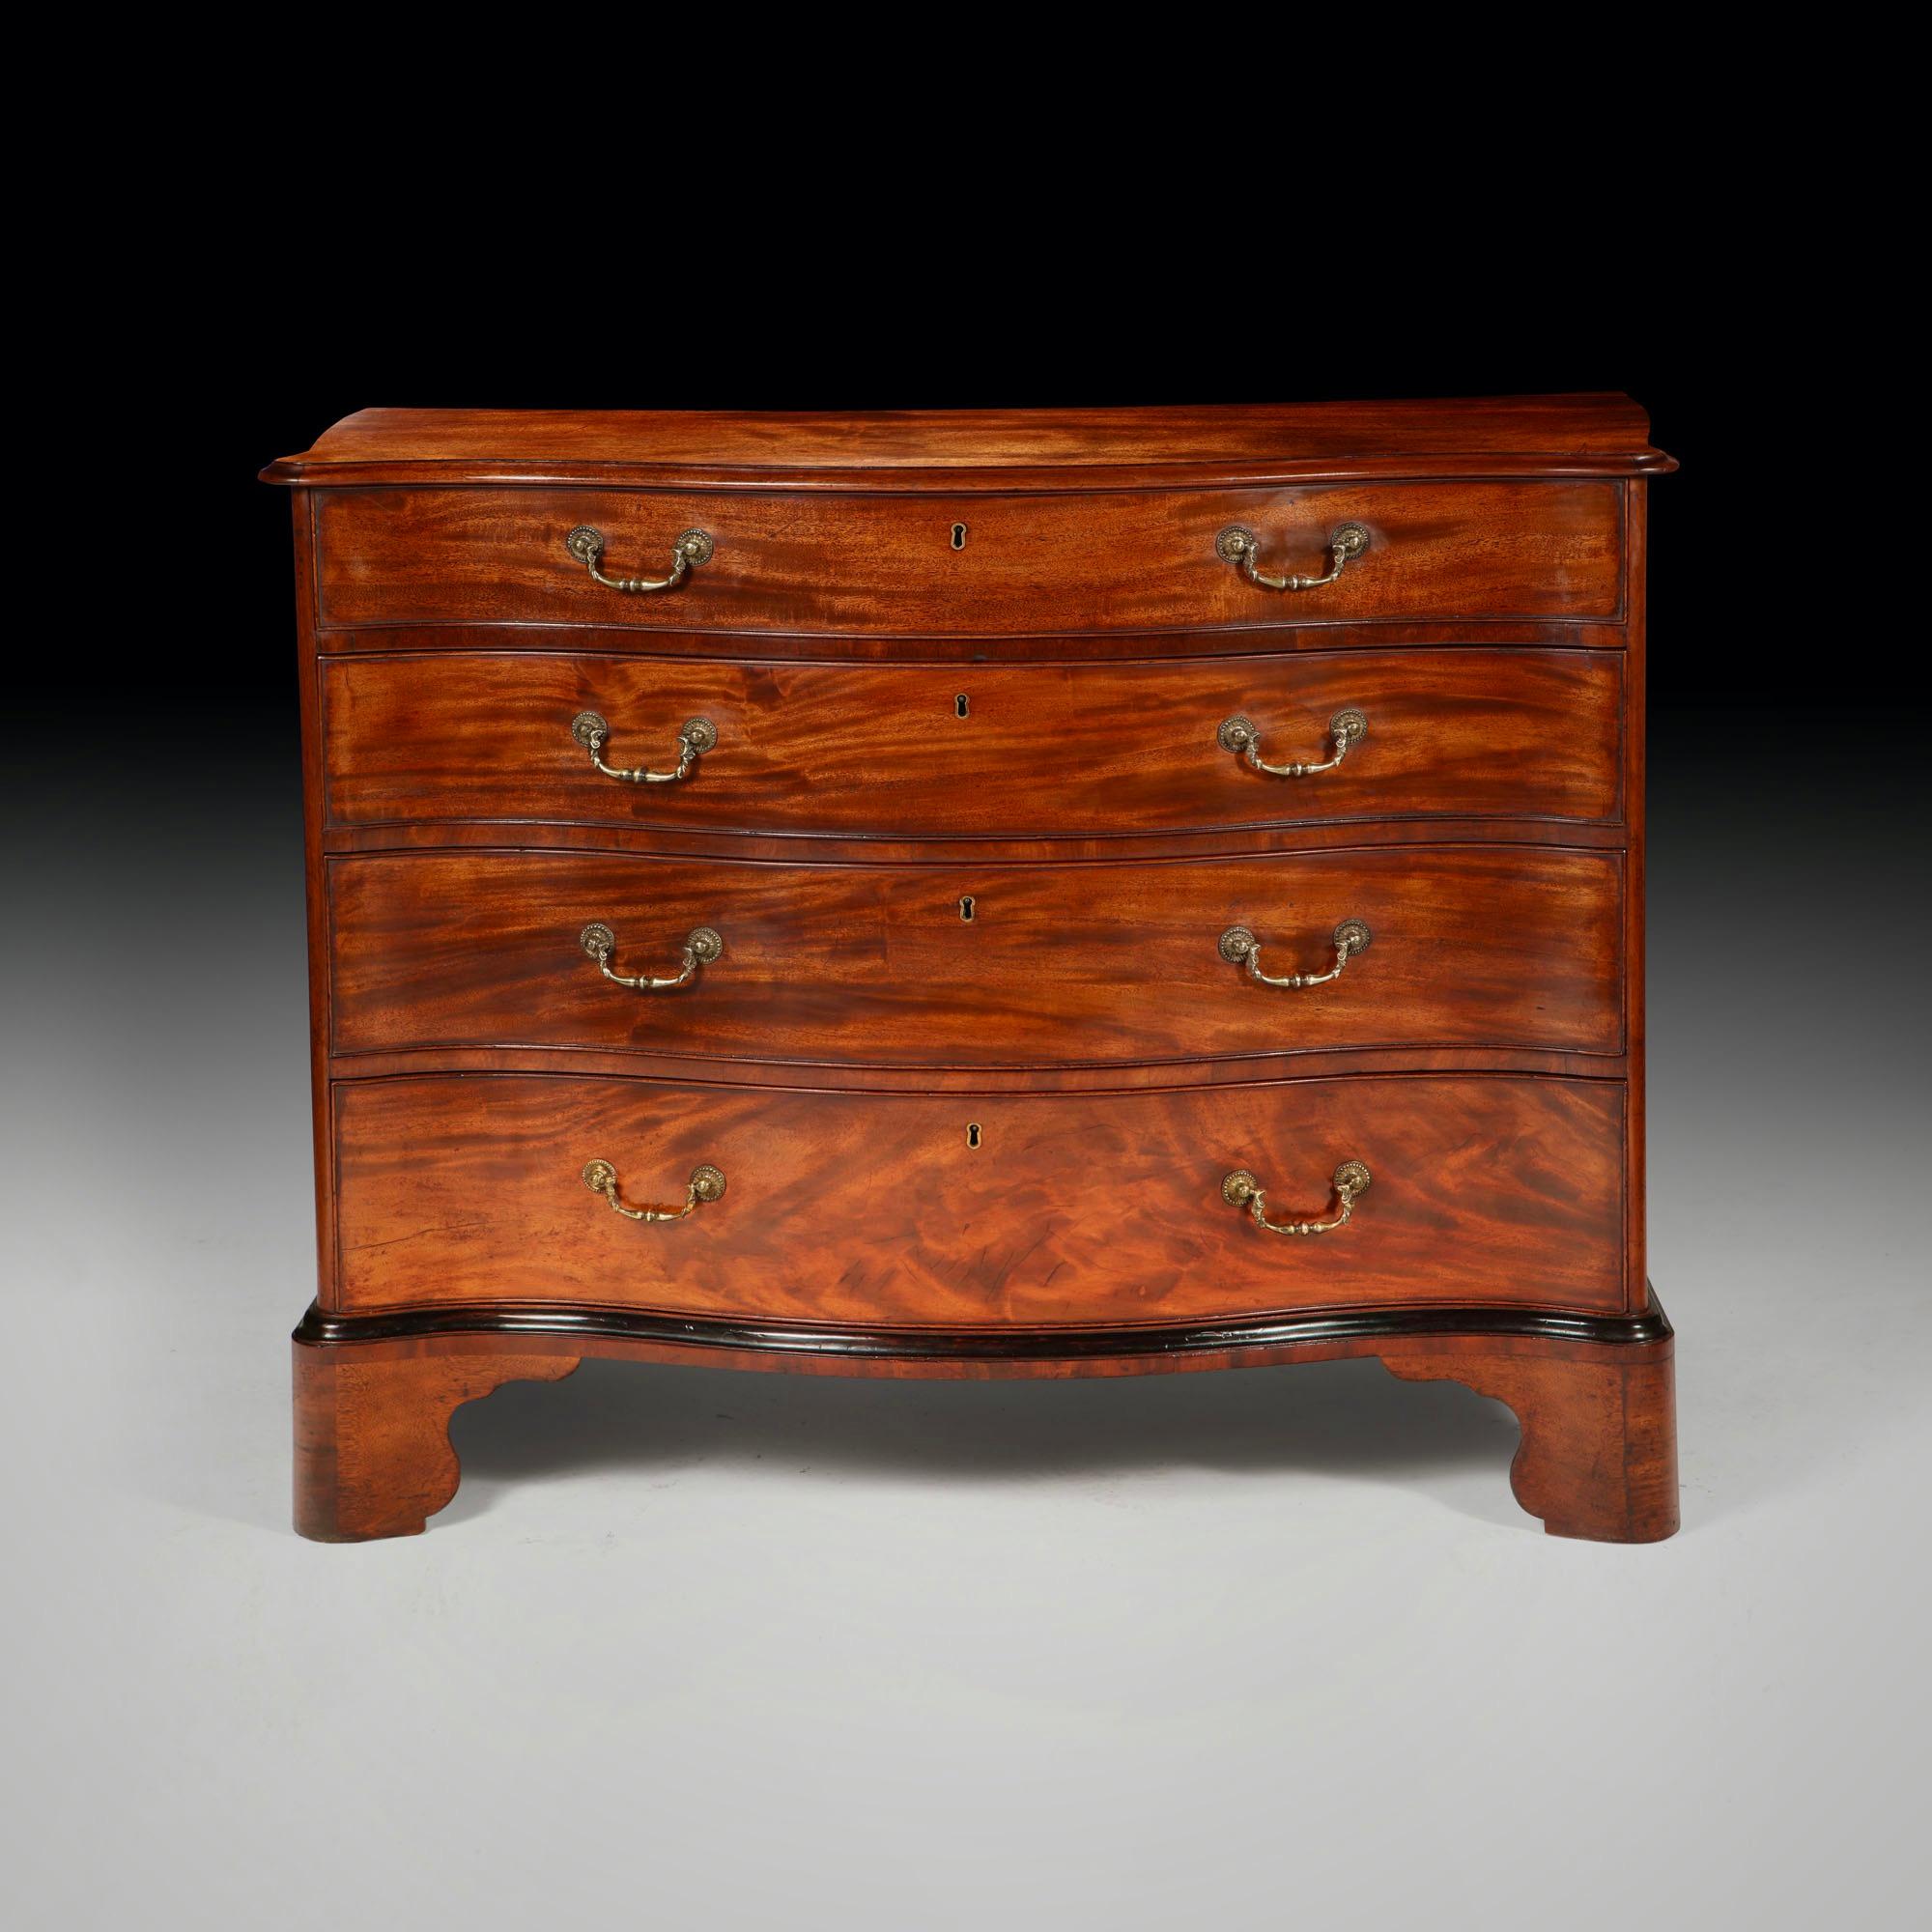 Dating from one of the most famous and highly celebrated periods in English furniture
history, now known as the ‘Chippendale period’.

This fine George III mahogany serpentine chest is very much in the manner of Thomas Chippendale. The exaugurated